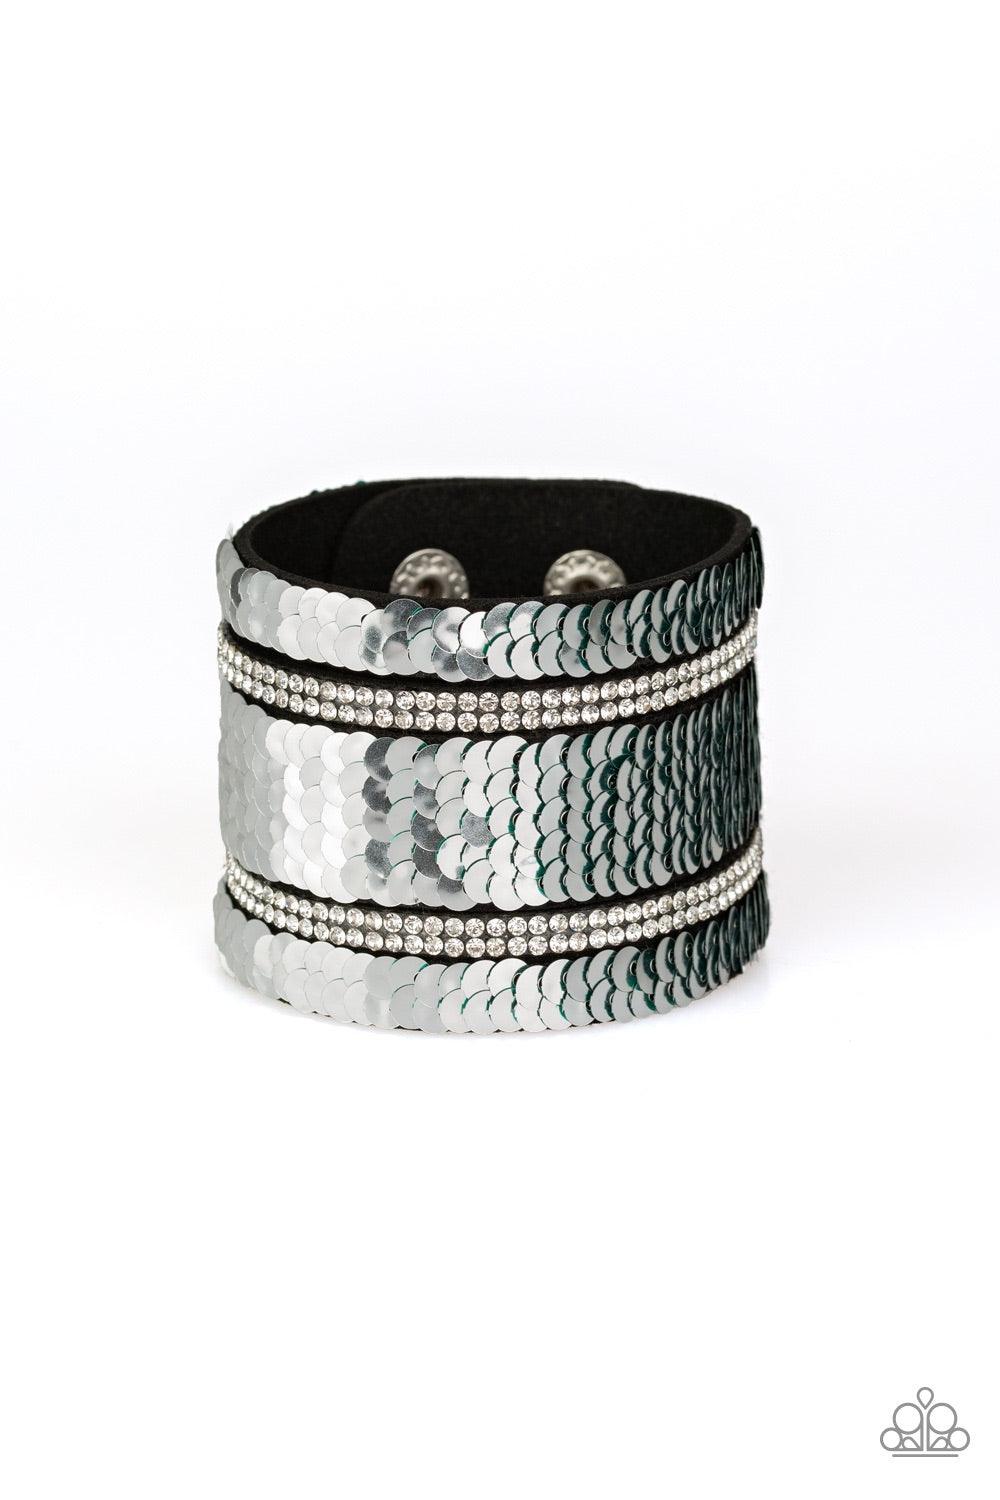 Paparazzi Accessories Mermaid Service - Green Infused with strands of blinding white rhinestones, row after row of shimmery sequins are stitched across the front of a spliced black suede band. Bracelet features reversible sequins that change from silver t